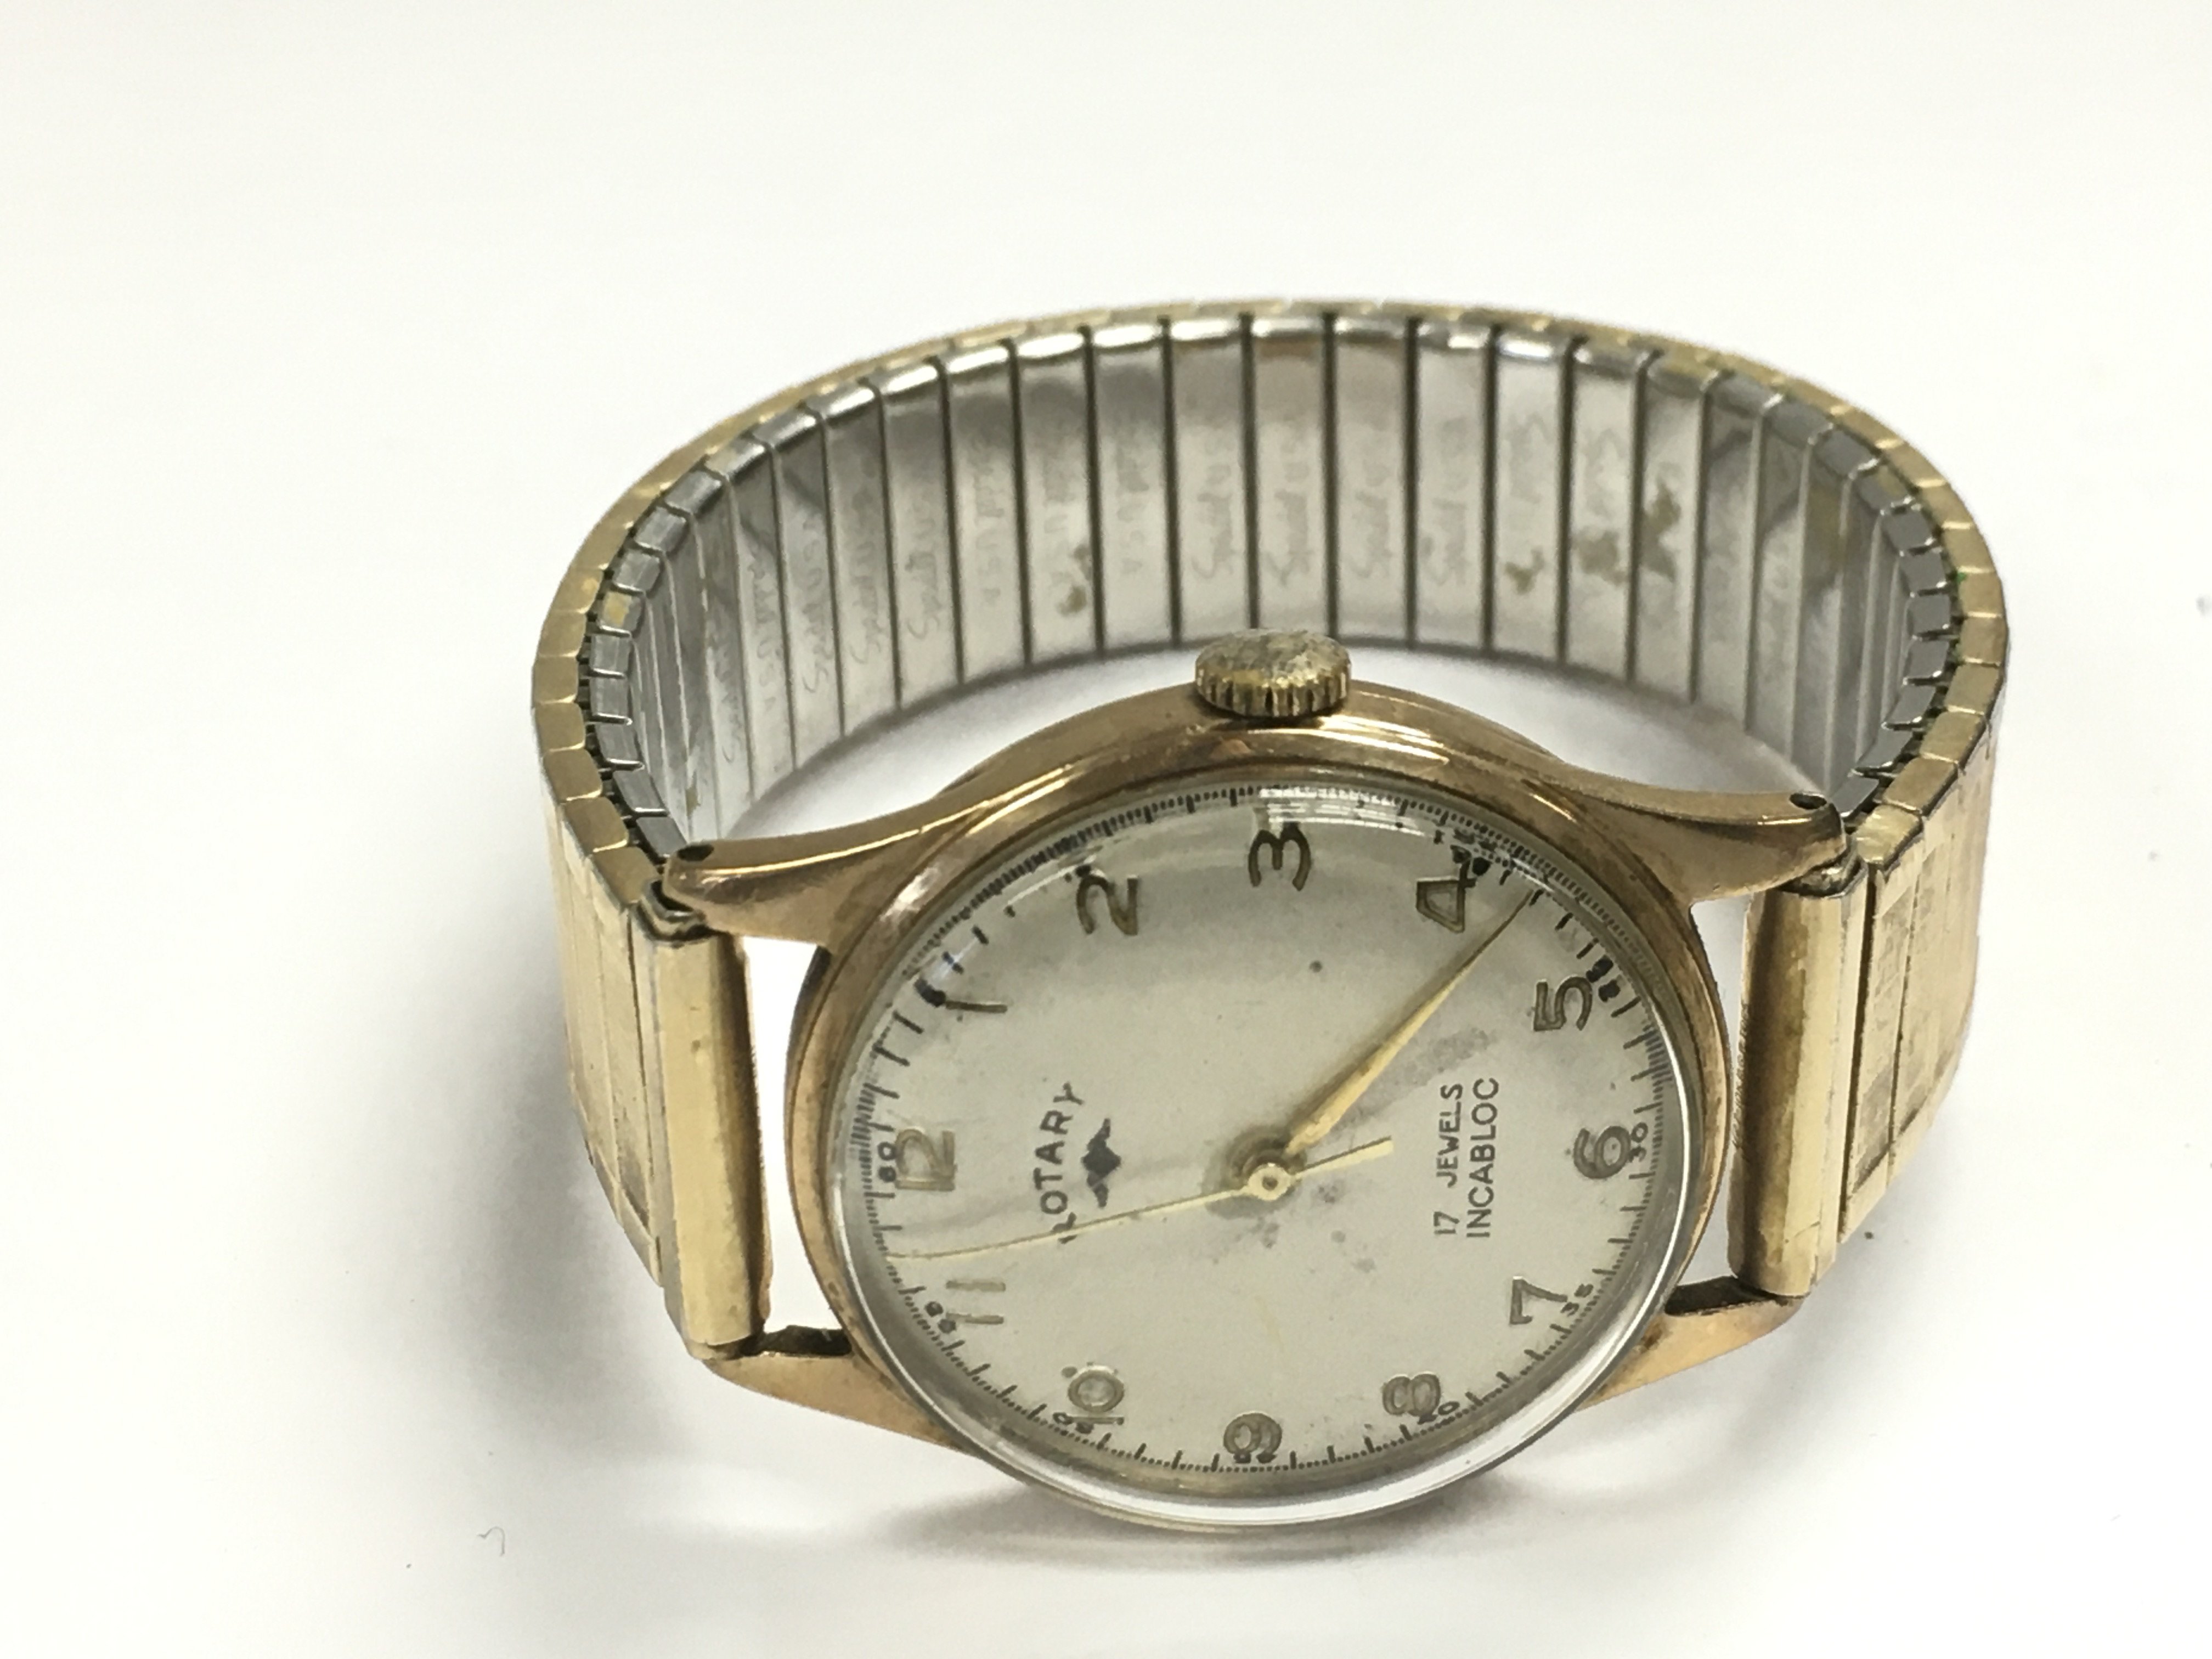 A gents 9ct gold Rotary watch with Arabic numerals